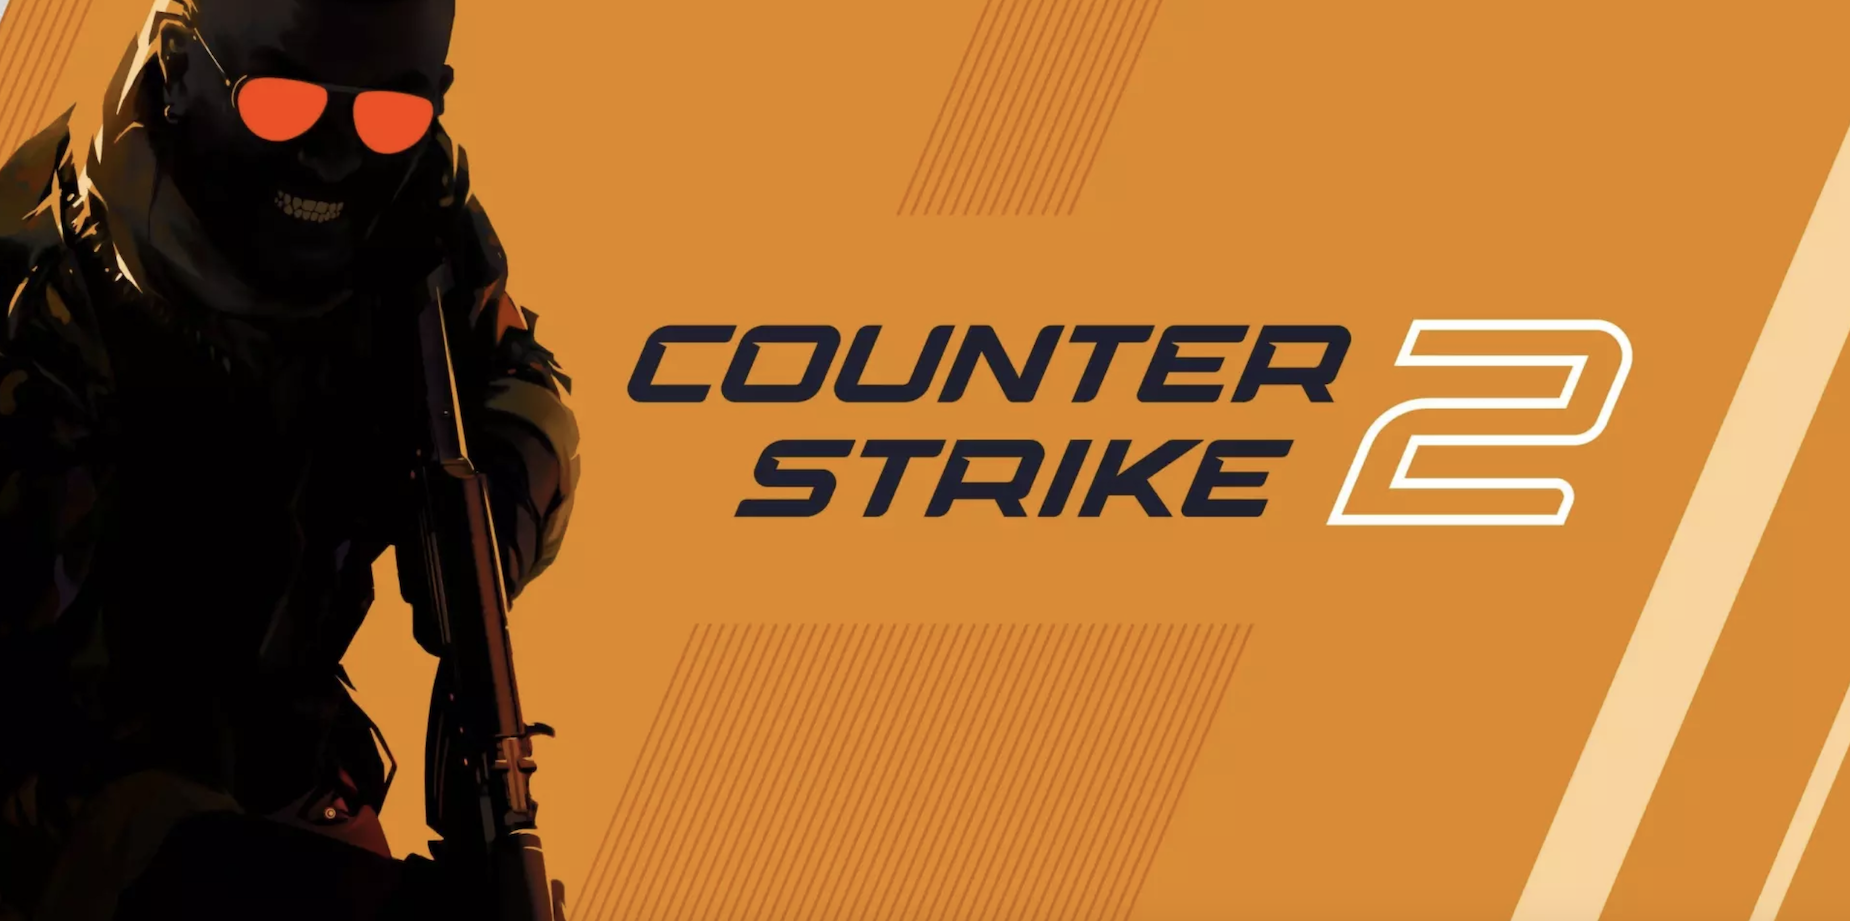 Explainer: What is the significance of Counter-Strike 2 and how will it  impact esports? - Sportcal